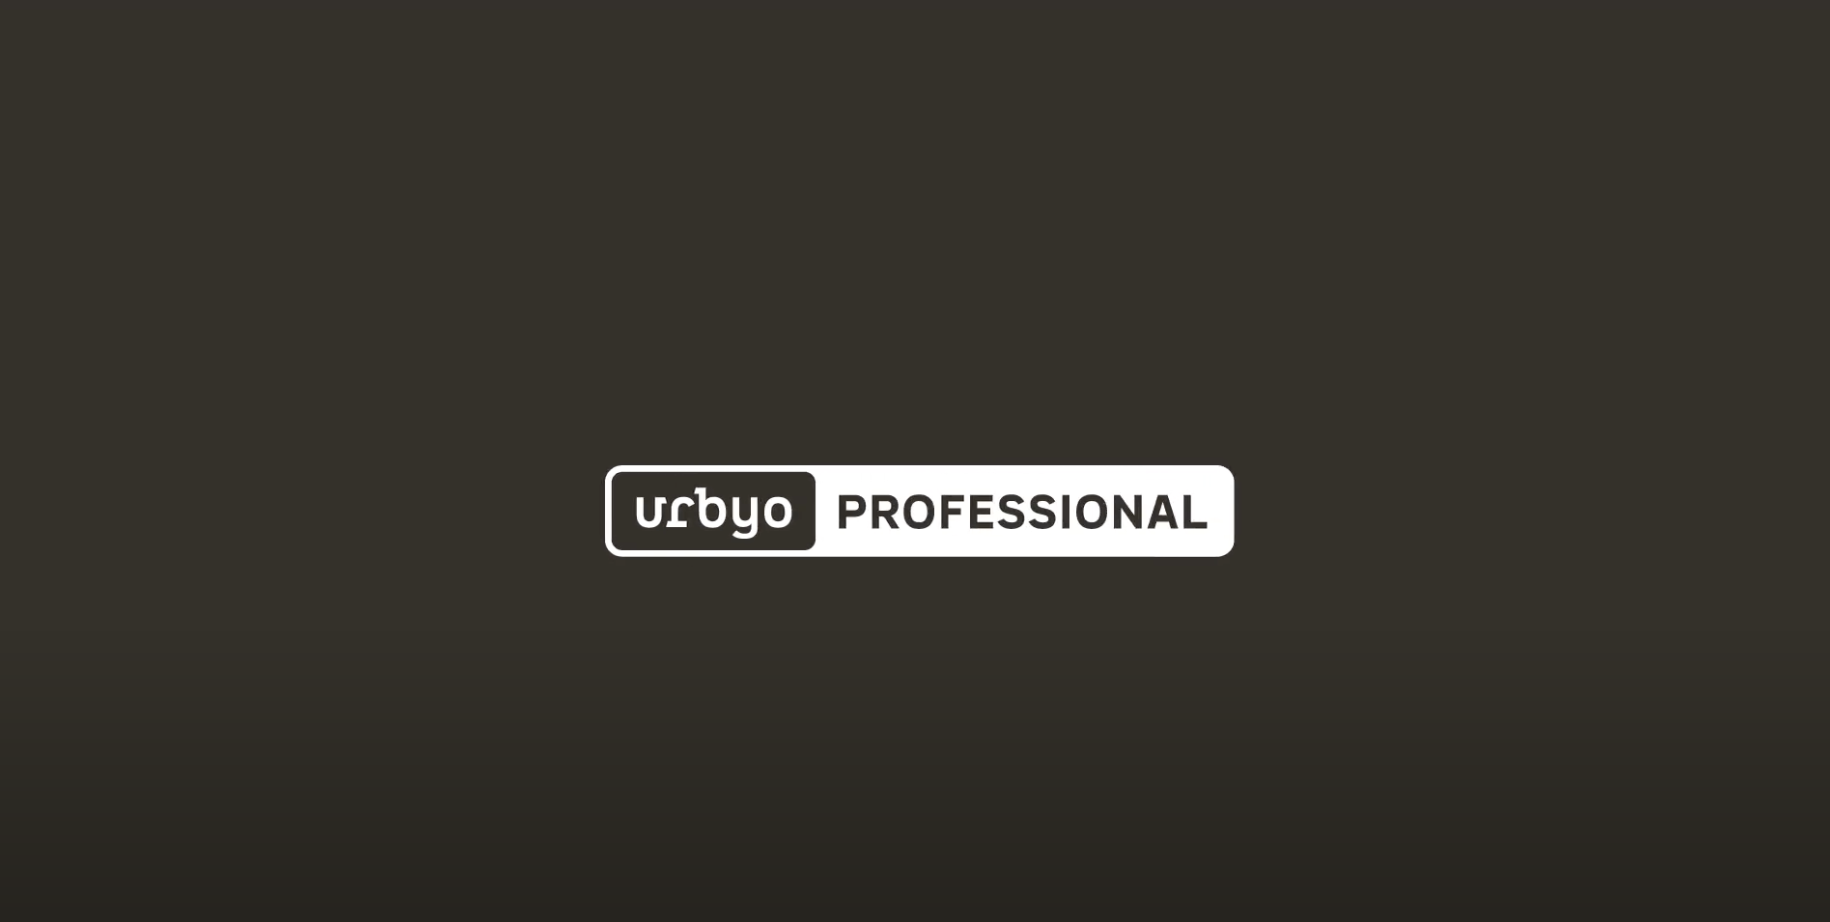 This is what Urbyo Professional offers